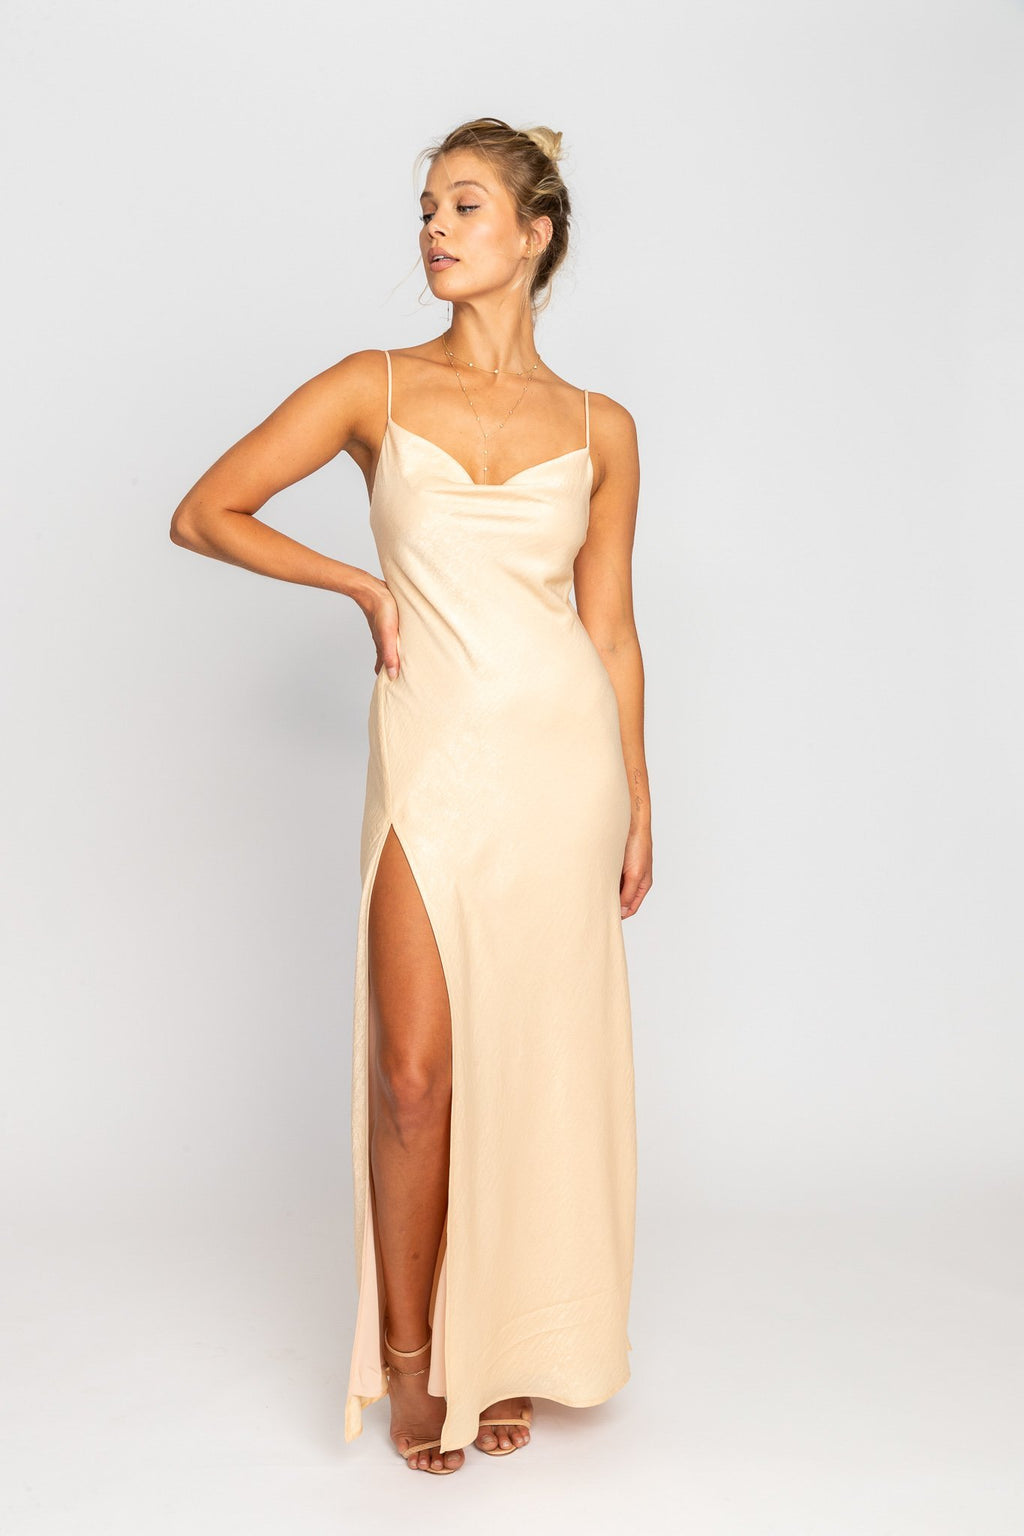 This is an image of River Slip - RESA featuring a model wearing the dress